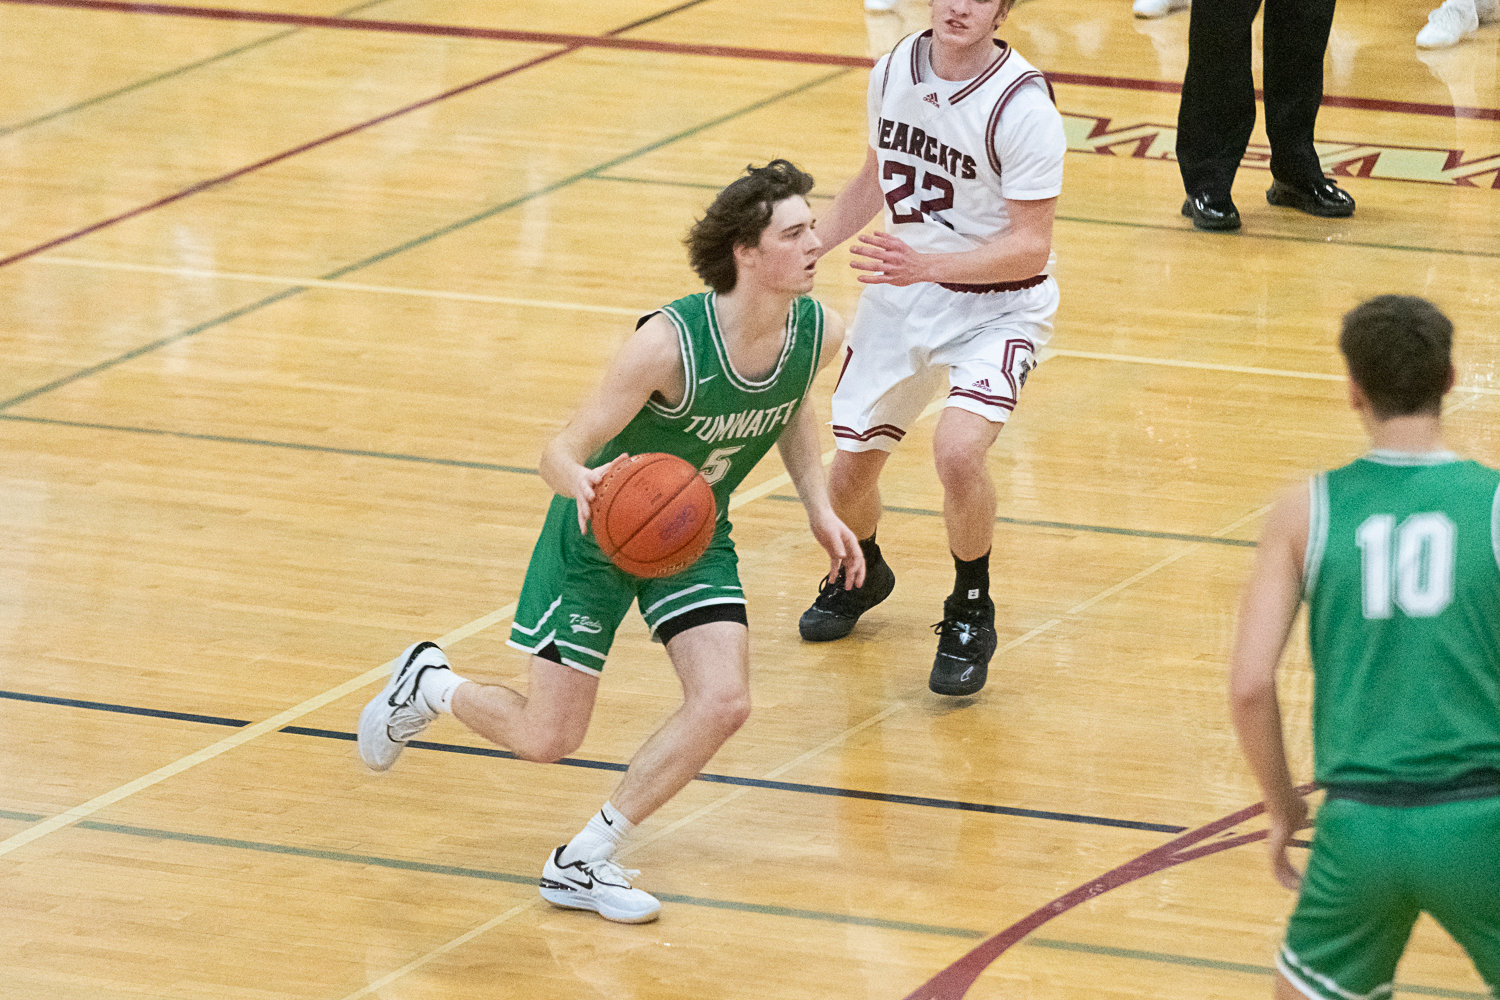 Luke Reid drives with the ball during the first quarter of Tumwater's 71-58 win at W.F. West on Jan. 11.